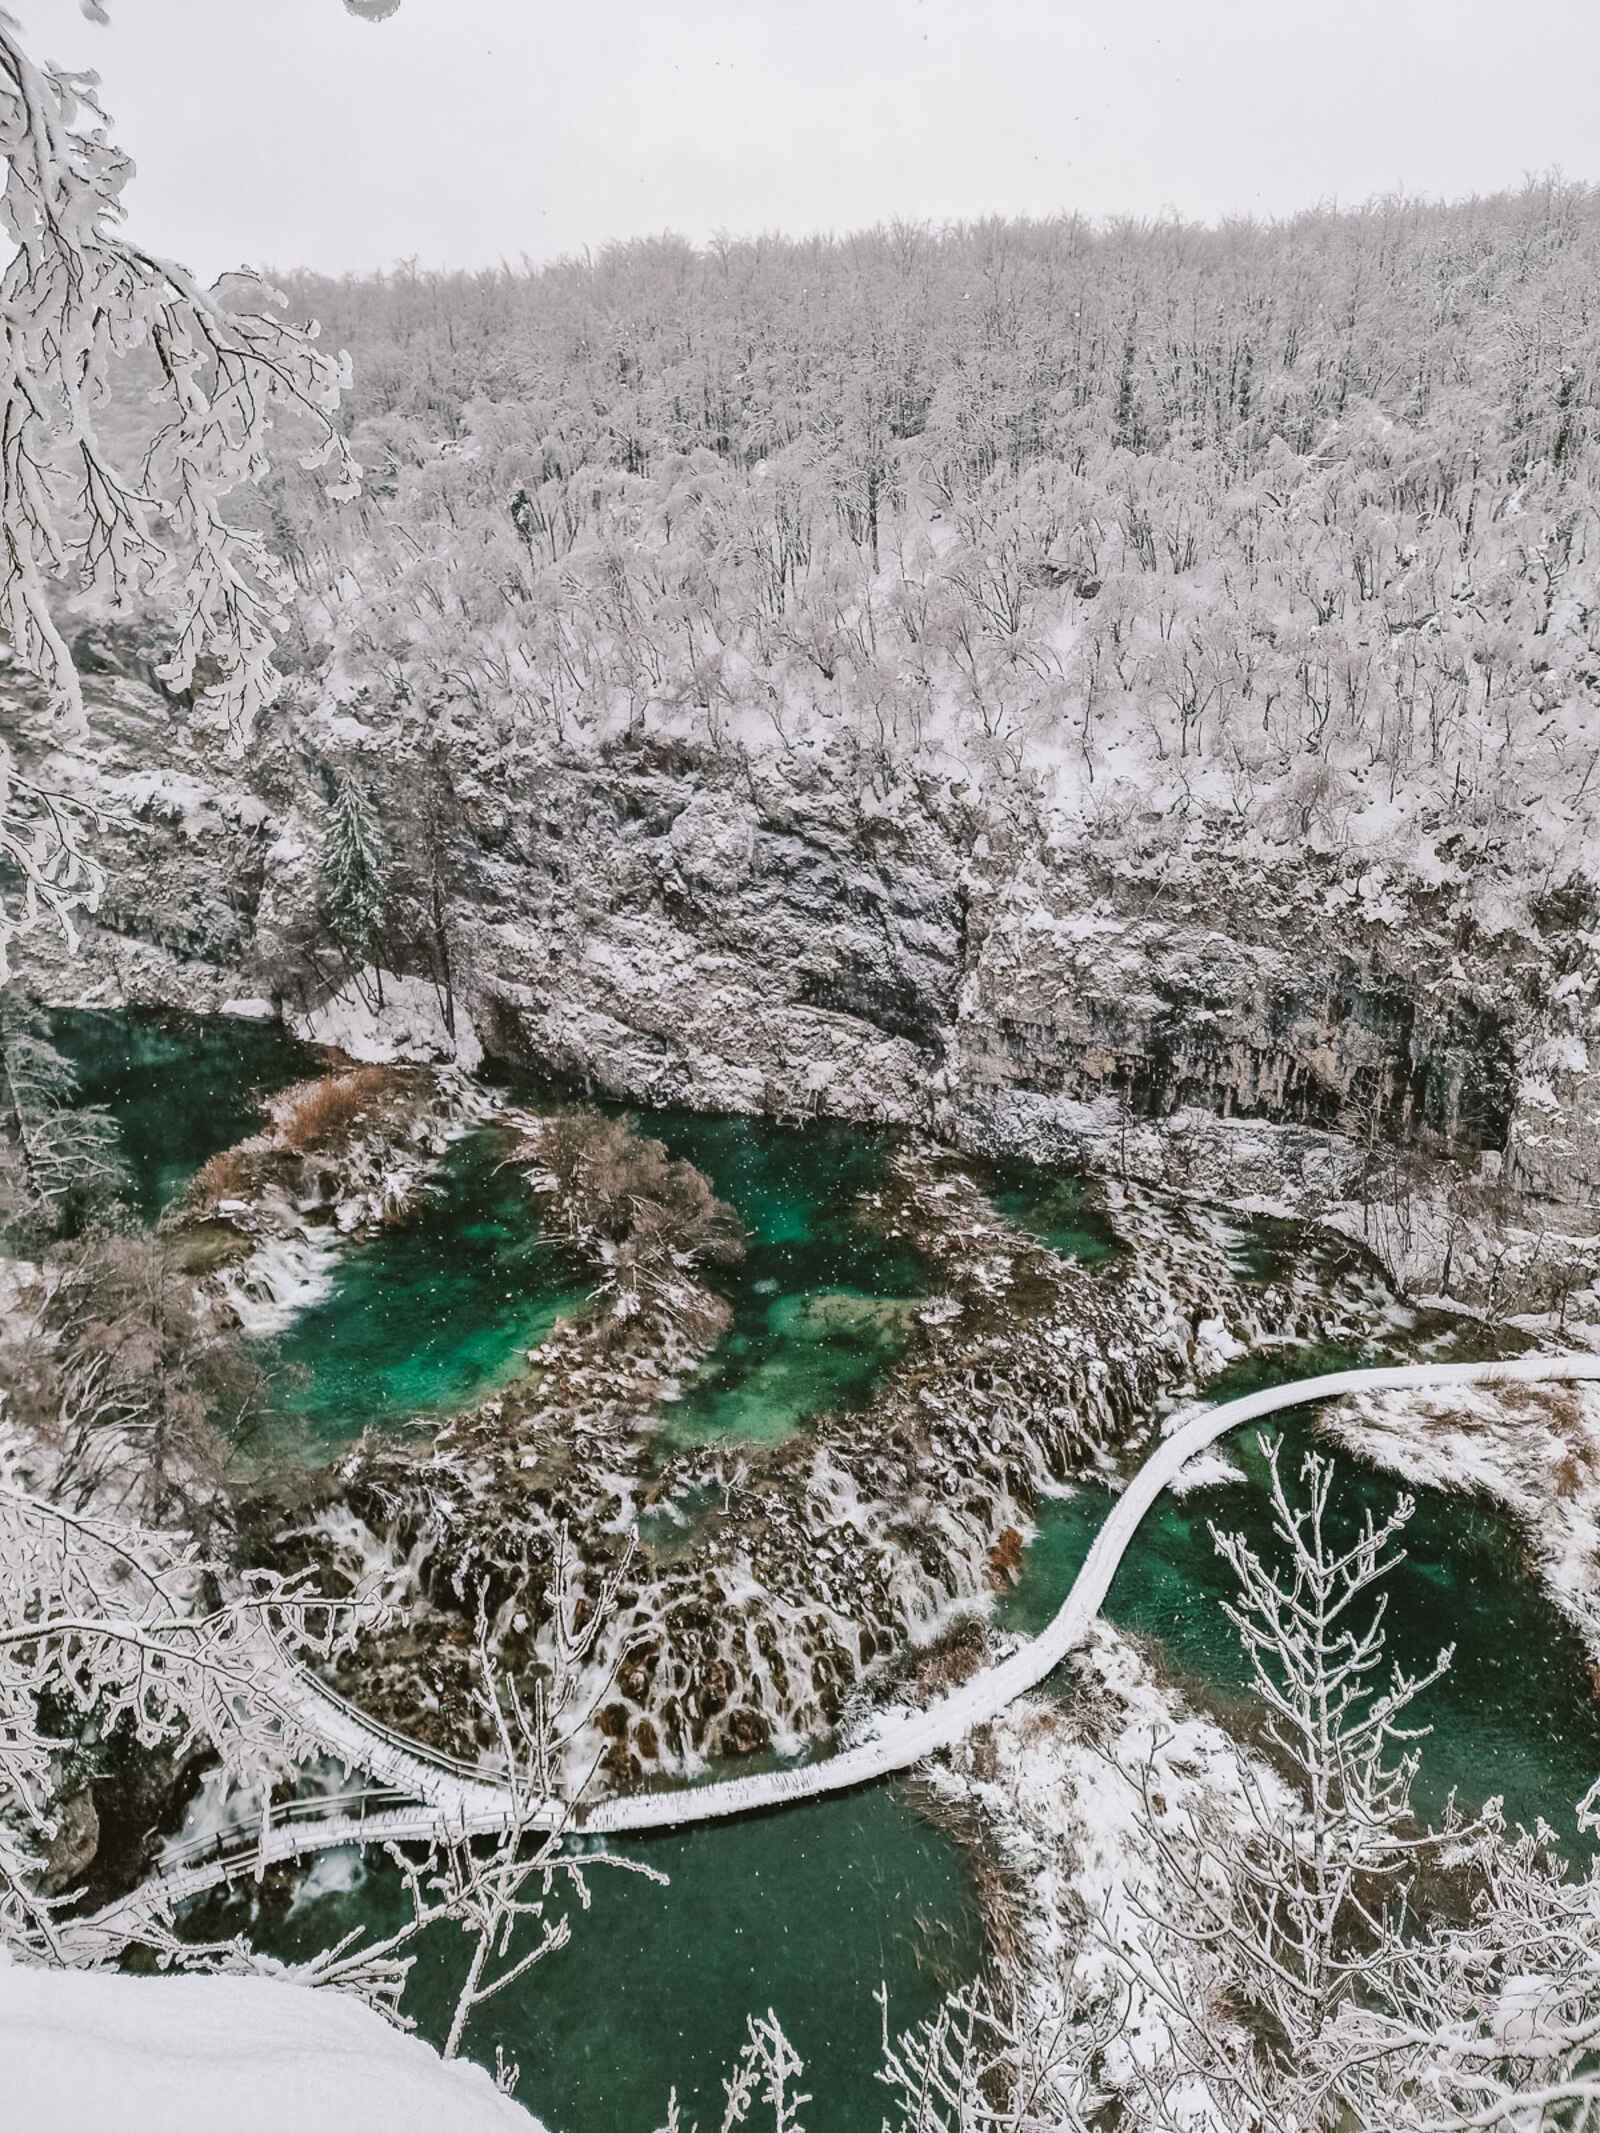 the famous plitvice lakes in croatia with emerald green water and walkways covered in snow